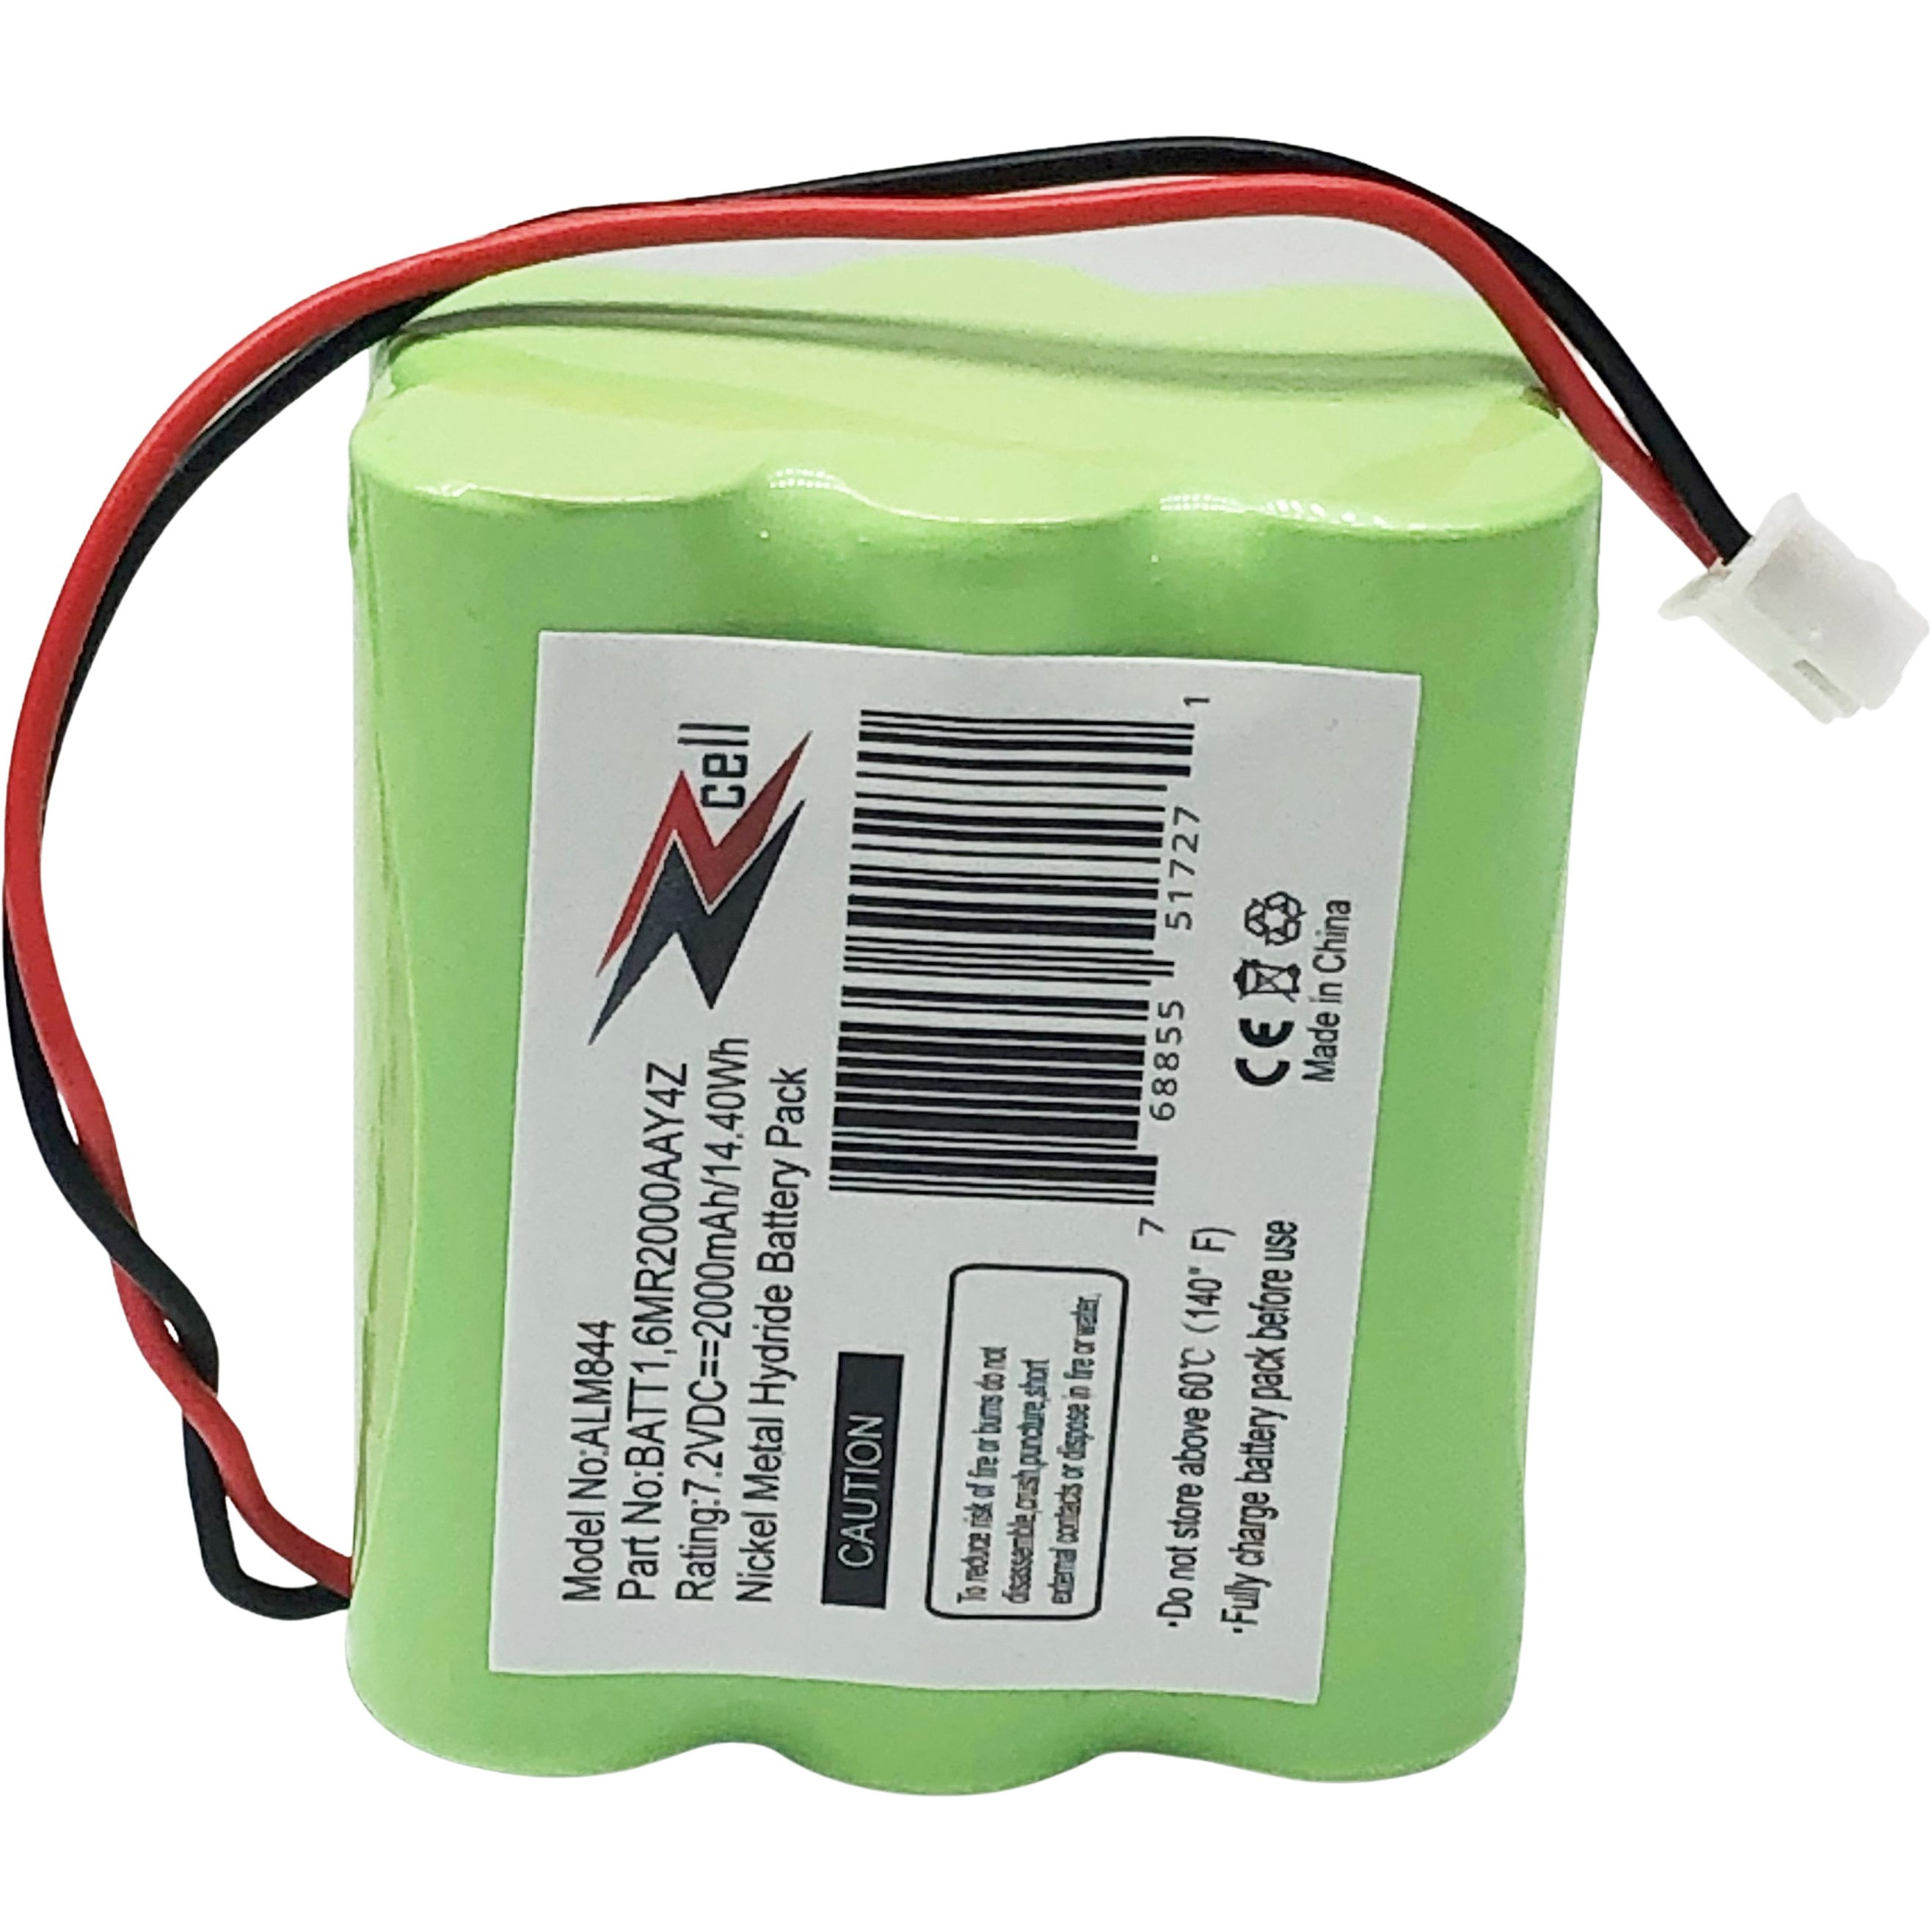 ZZcell Replacement Battery For 2Gig BATT1, BATT1X, BATT2X, 6MR2000AAY4Z, GC2 2GIG-CNTRL2 2GIG-CP2, GCKIT311, 228844, Go Control Panel Alarm System 10-000013-001, PERS-4200 - image 5 of 6